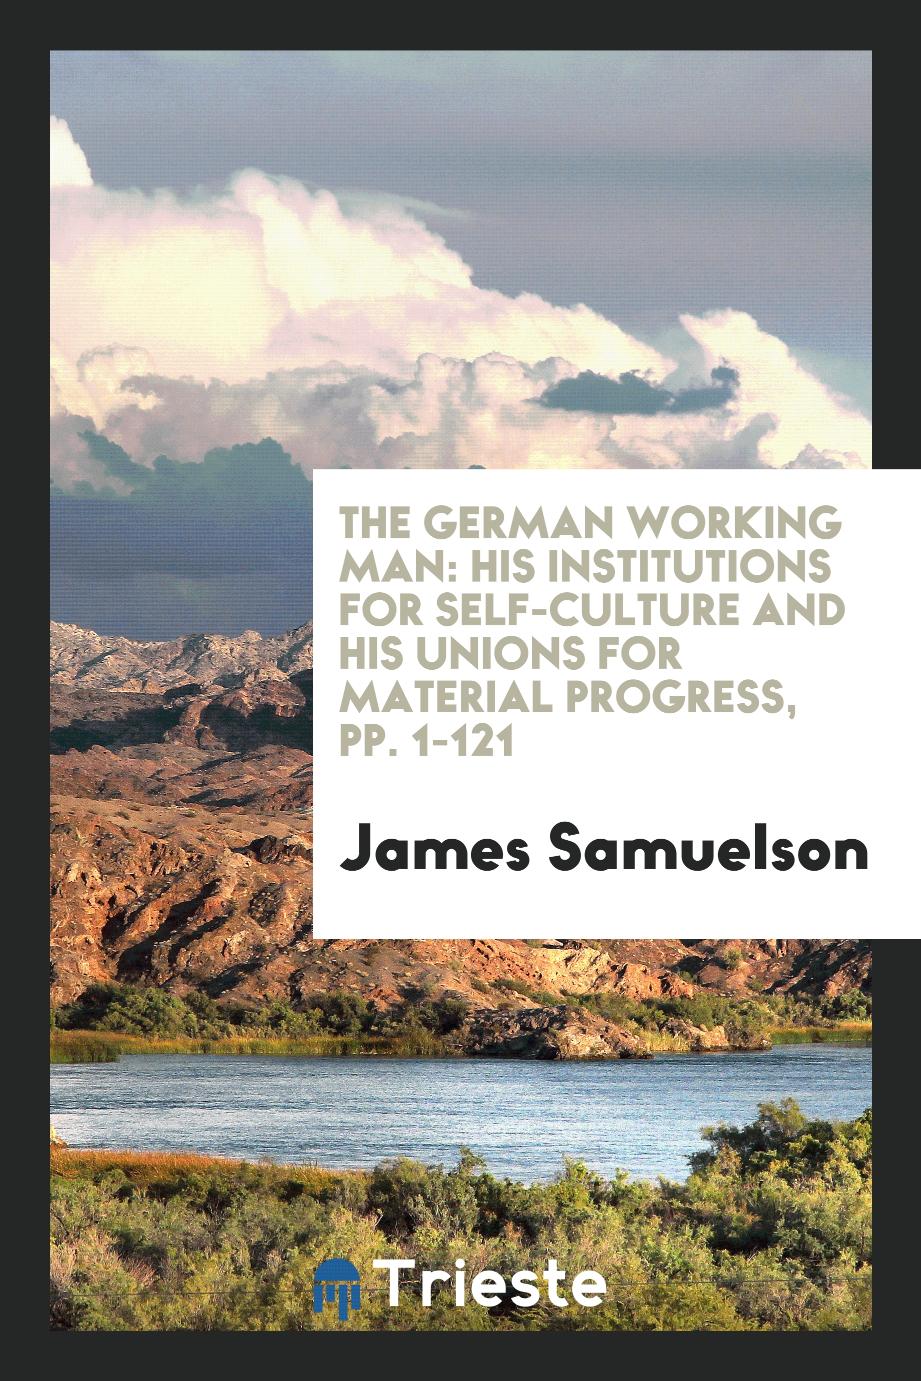 The German Working Man: His Institutions for Self-Culture and His Unions for Material Progress, pp. 1-121